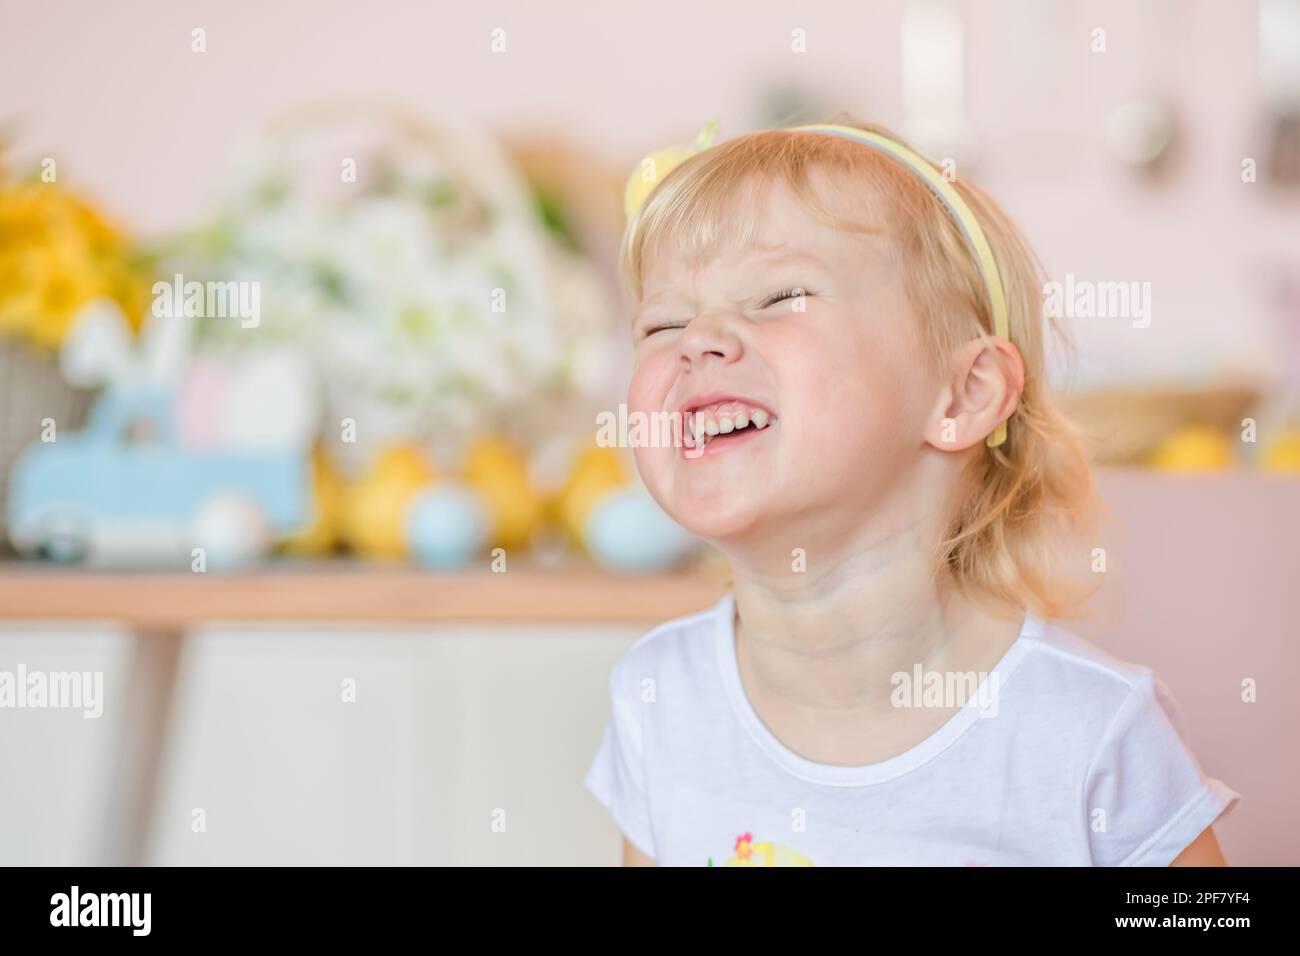 Adorable happy little blonde girl with short hair in white dress with in kitchen on Easter day Stock Photo